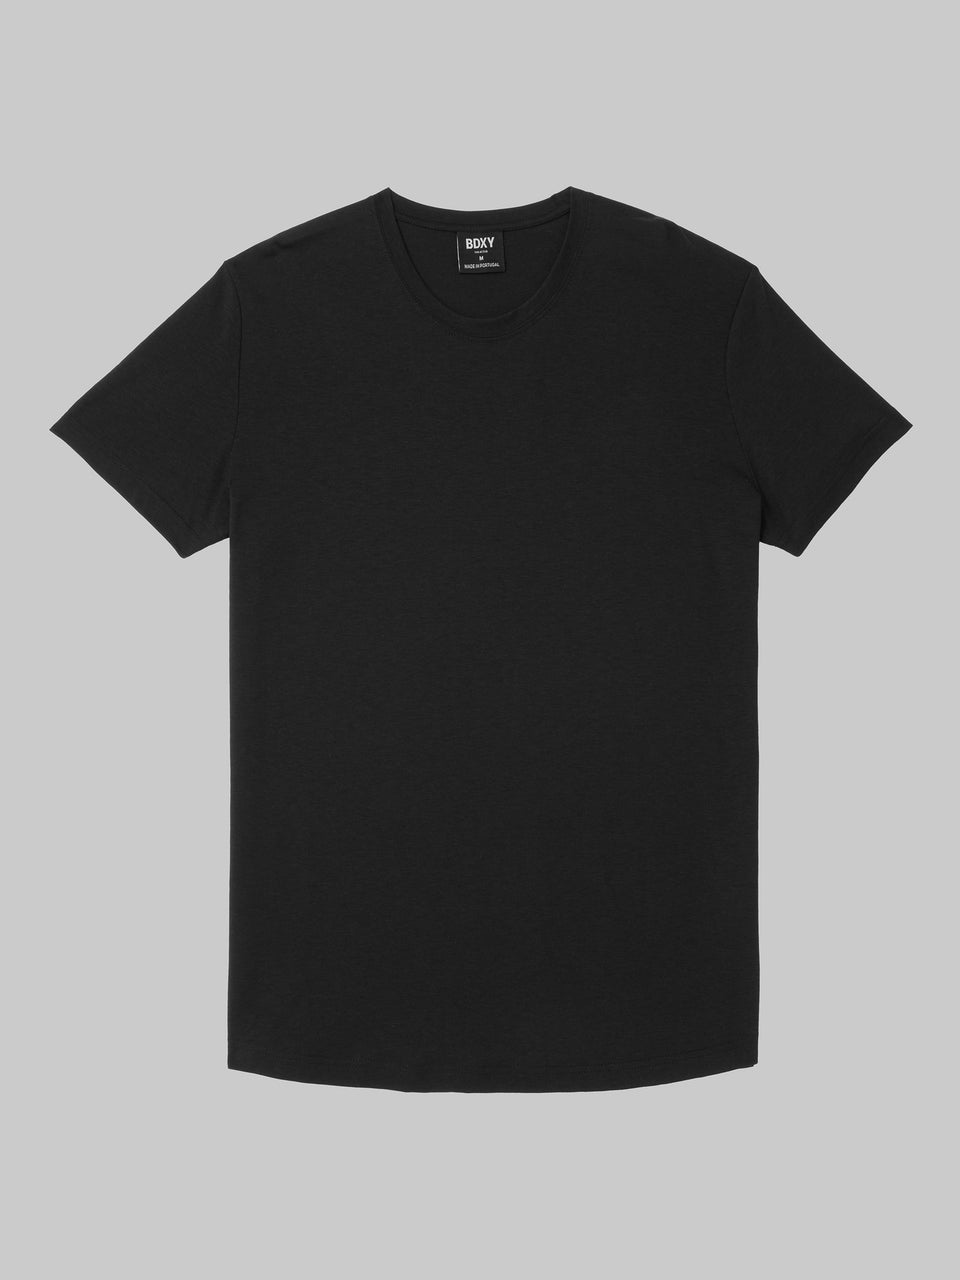 'The Actor' T-shirt - Black